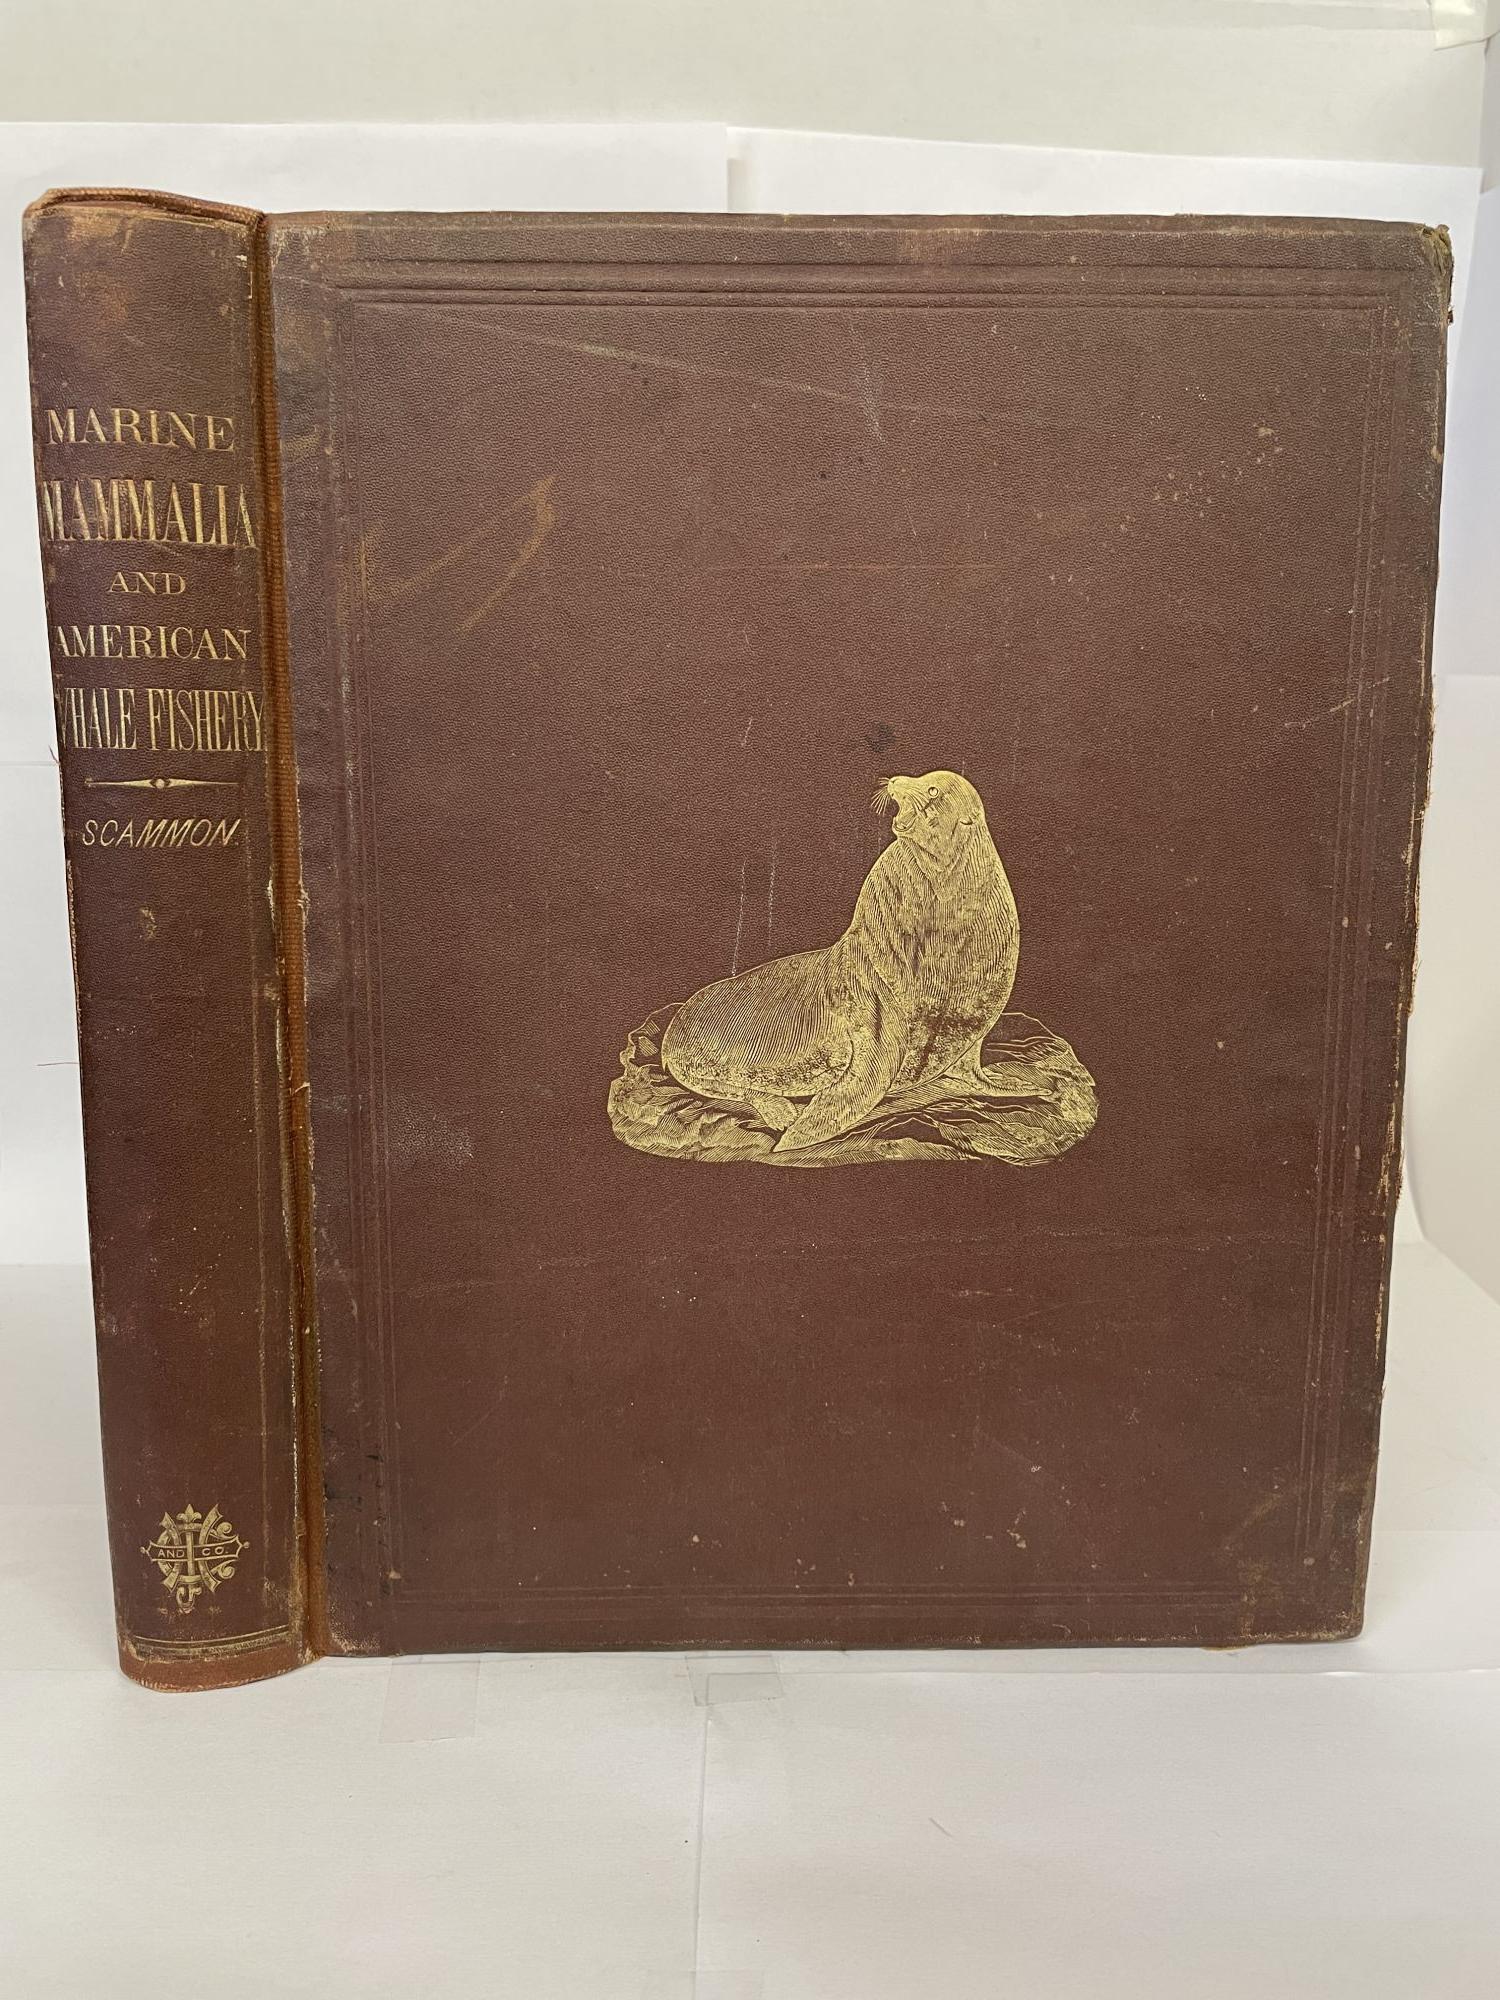 1349864 THE MARINE MAMMALS OF THE NORTH-WESTERN COAST OF NORTH AMERICA, DESCRIBED AND ILLUSTRATED: TOGETHER WITH AN ACCOUNT OF THE AMERICAN WHALE-FISHERY. Charles M. Scammon.